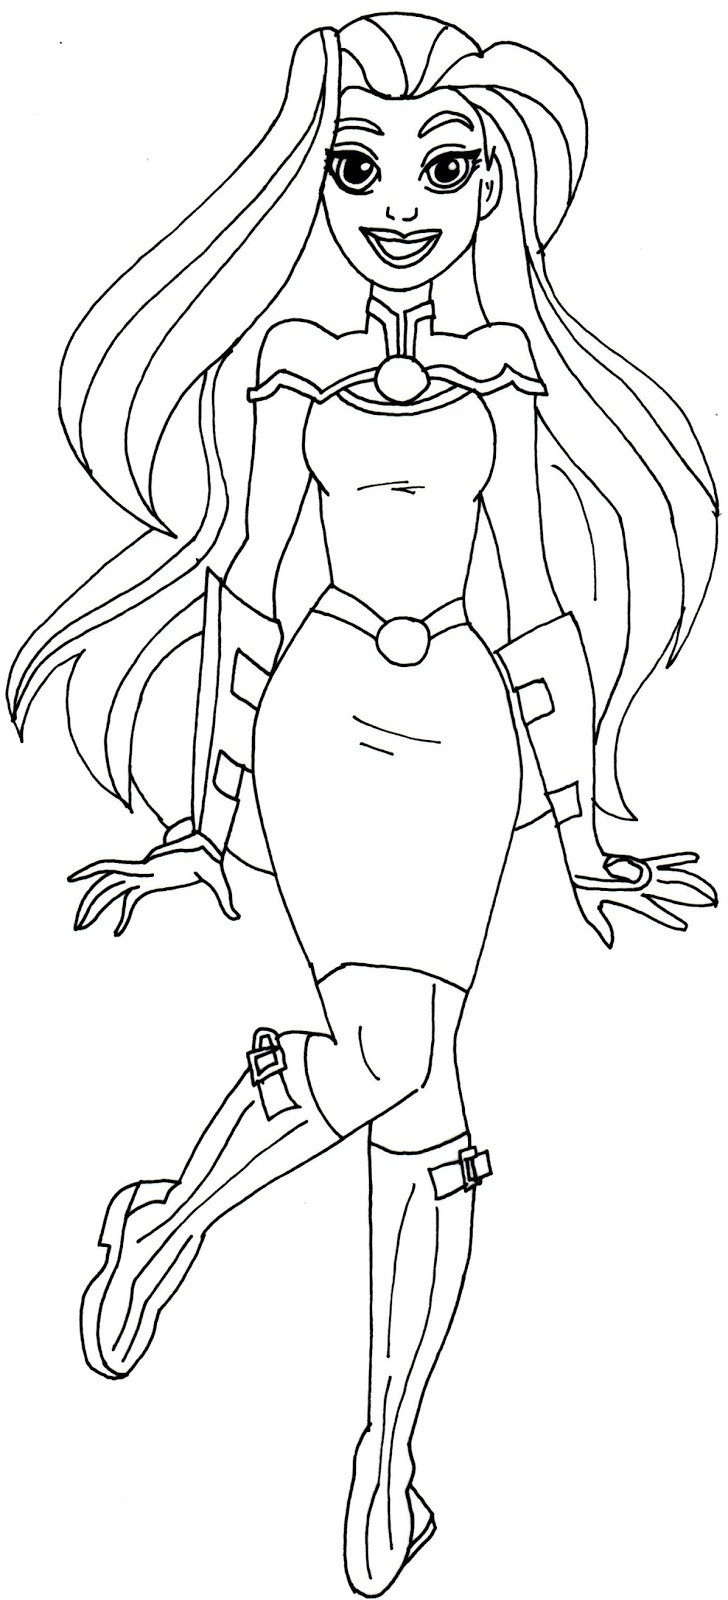 Super Hero Coloring Book Pages
 Happy Dc Superhero Girls Coloring Pages Free P